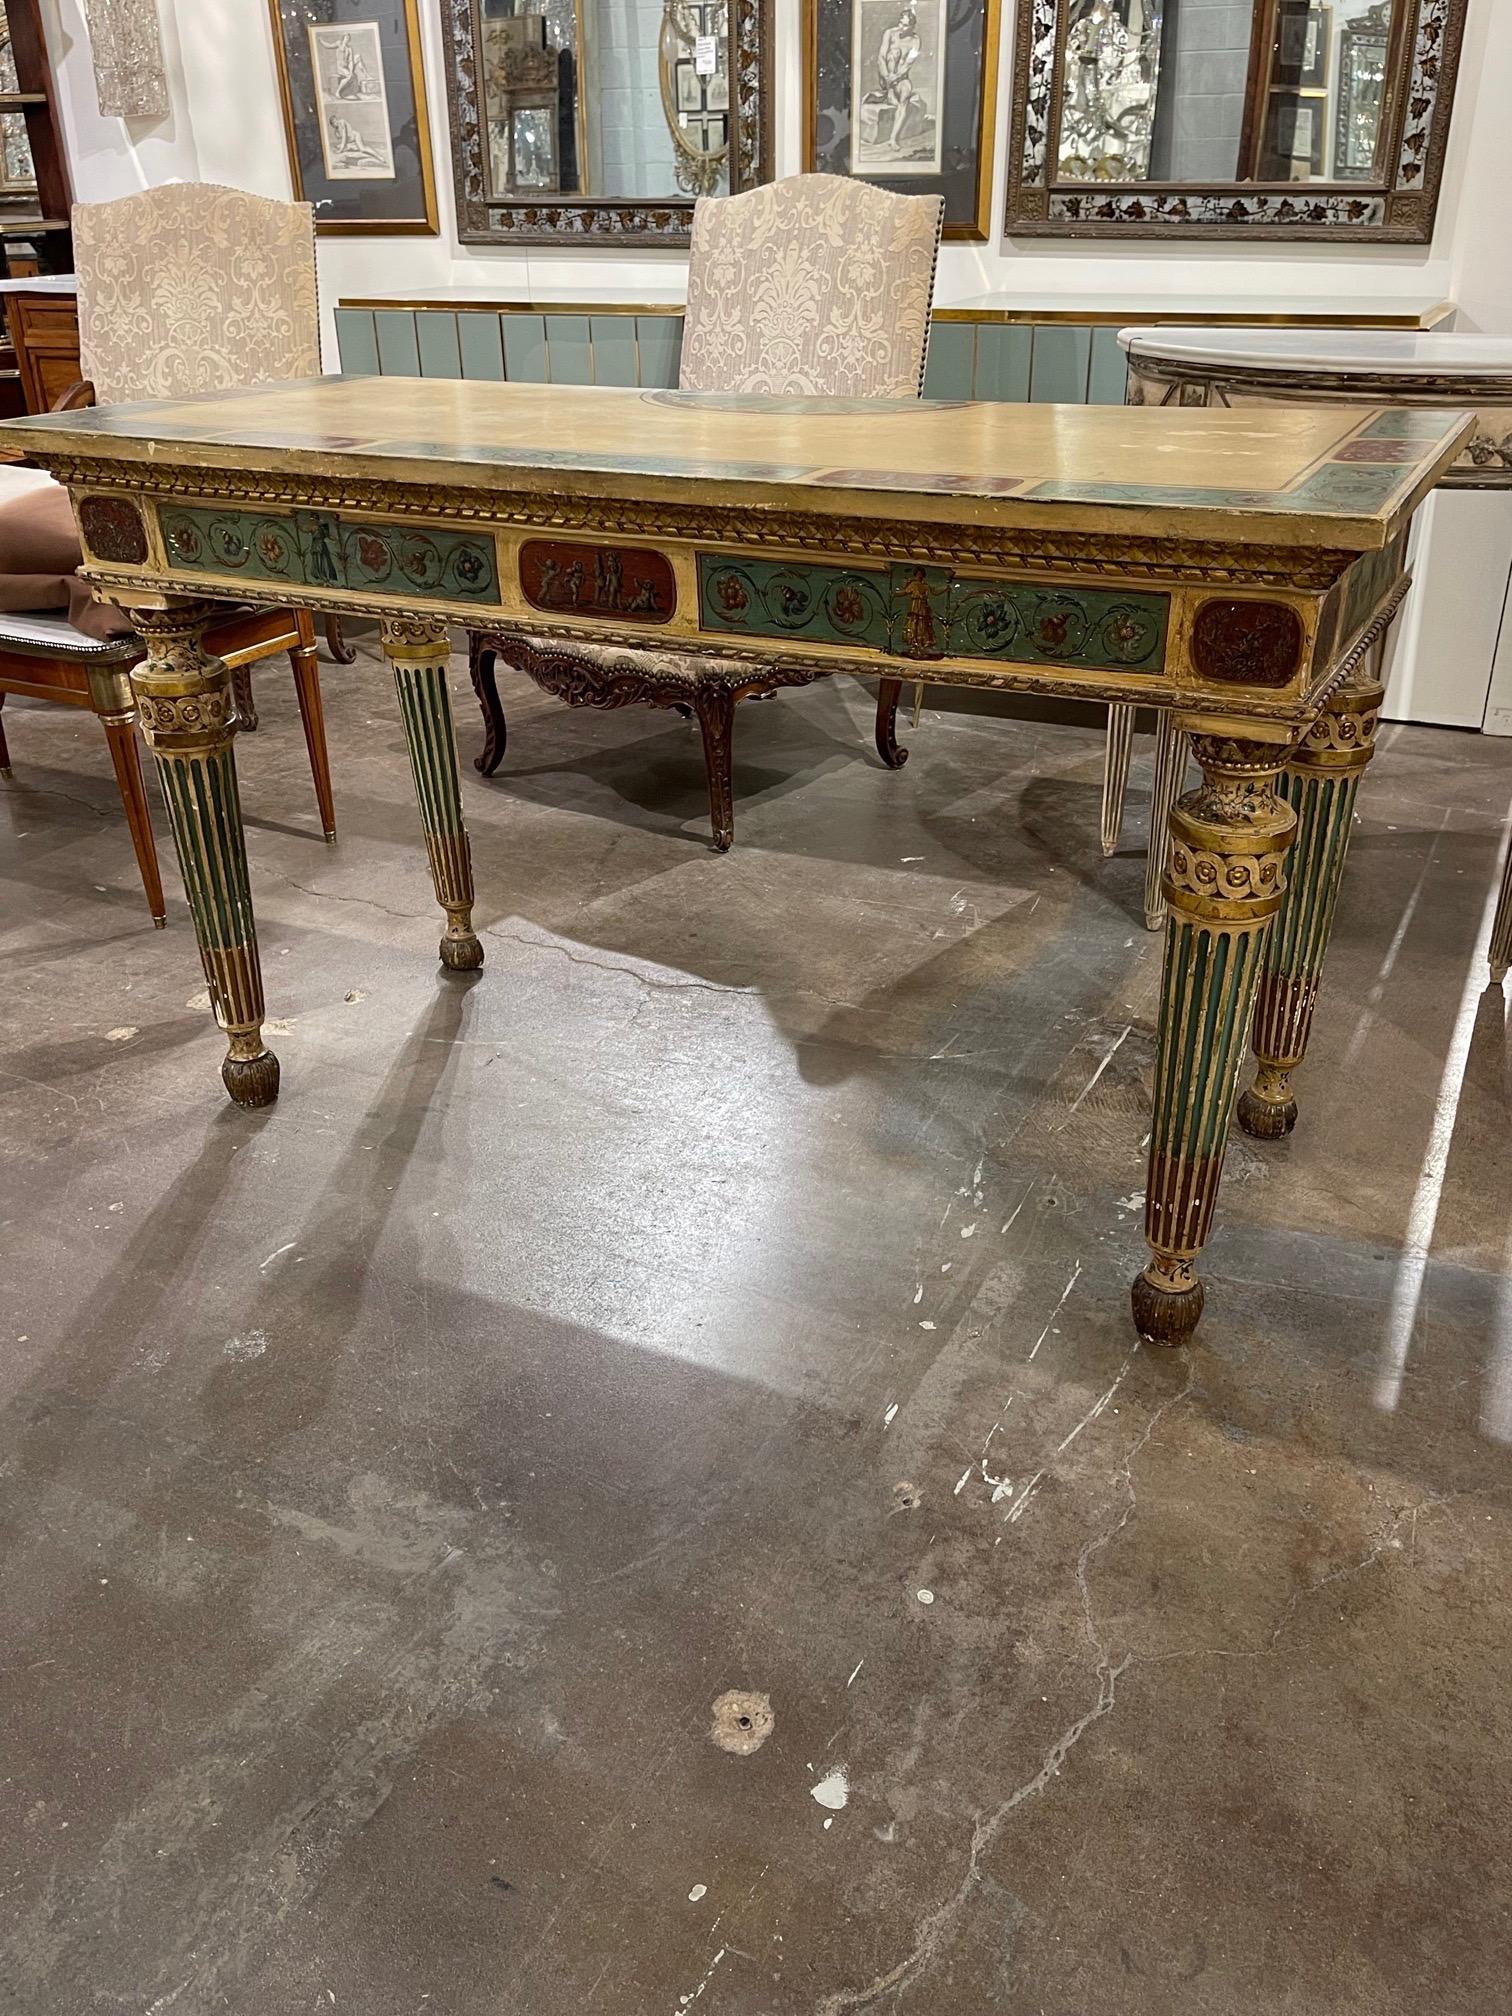 Beautiful 19th century Italian carved and painted console table. Very pretty neo-classical designs in red, green and gold. Very fine carving as well. Super special and so unique!